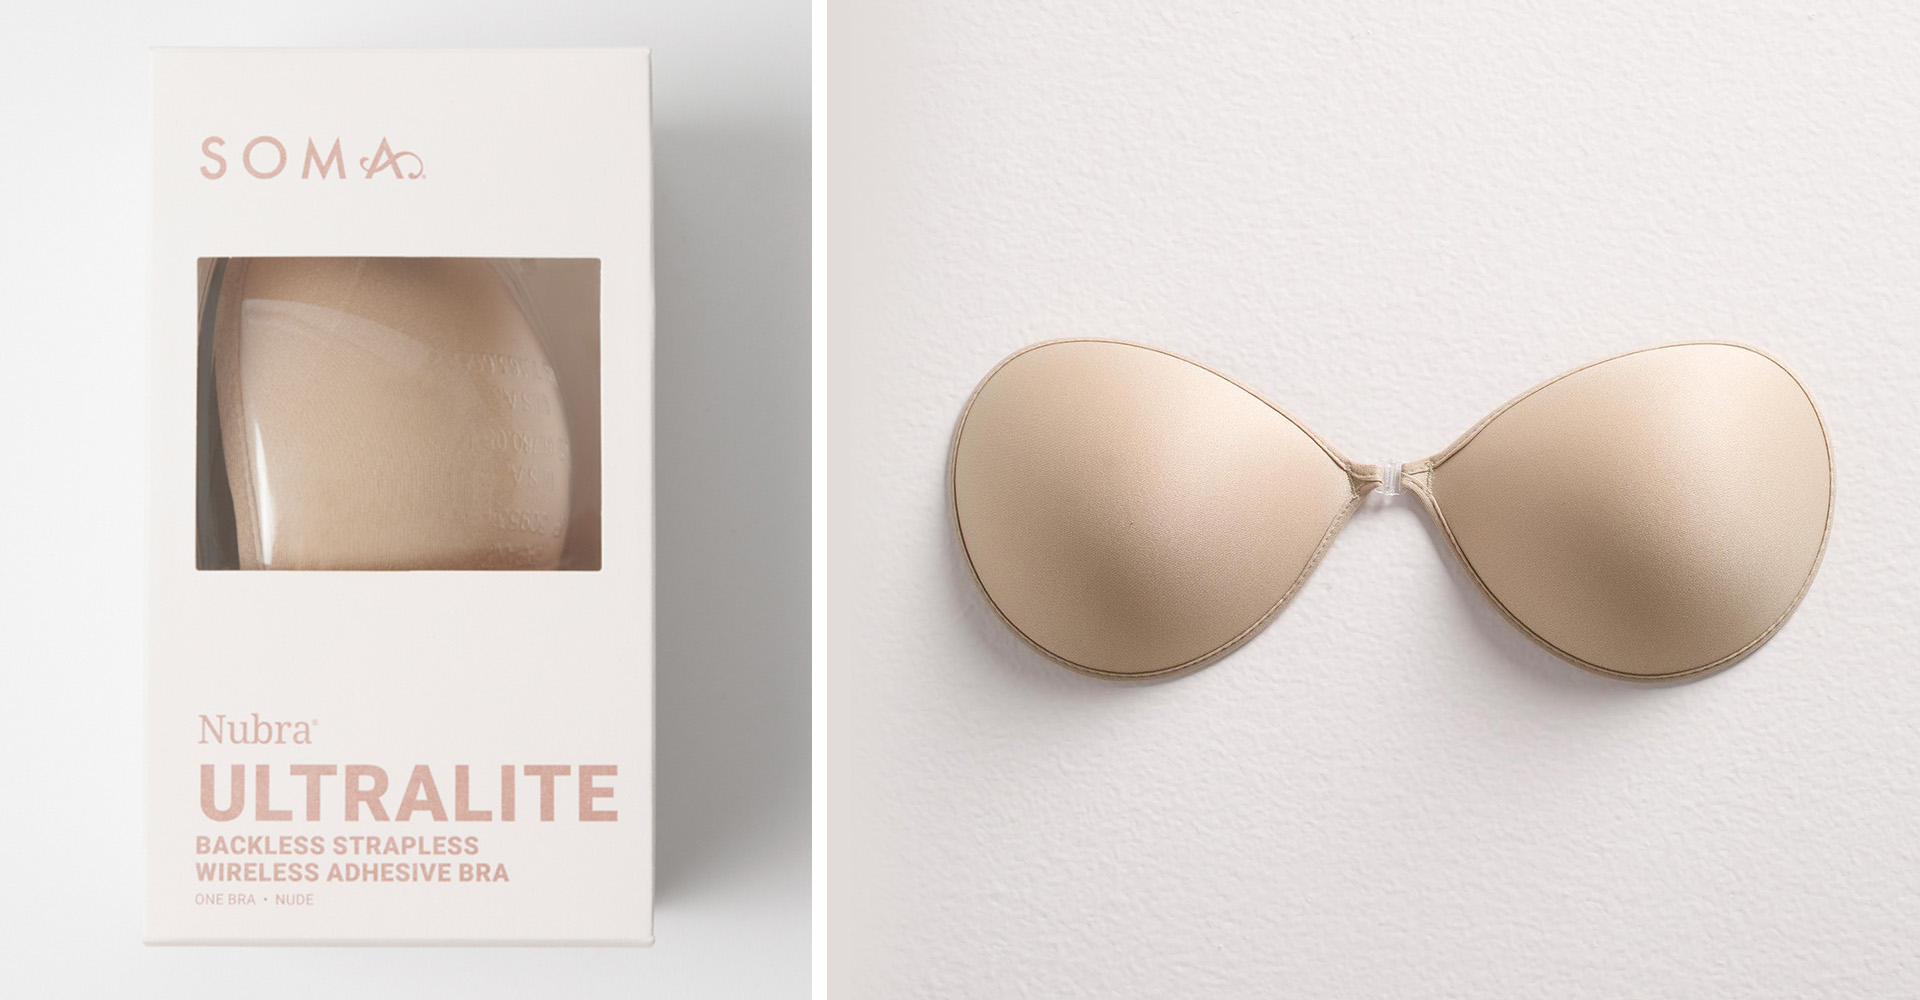 Soma<sup class=st-superscript>®</sup> packaging of a nude backless strapless bra. Laydown of nude adhesive backless strapless bra.